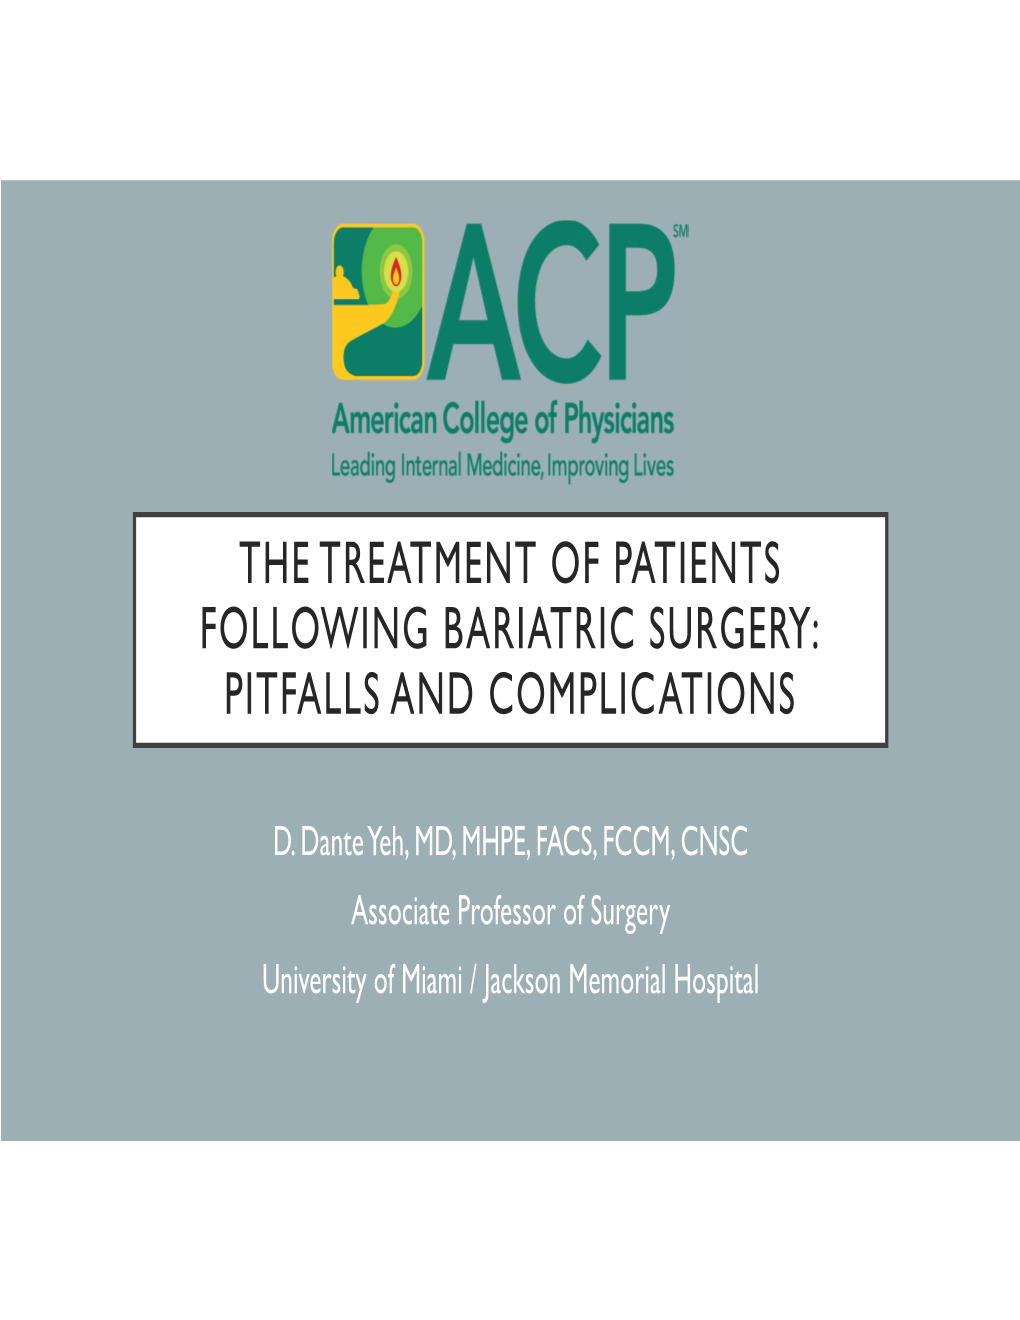 The Treatment of Patients Following Bariatric Surgery: Pitfalls and Complications